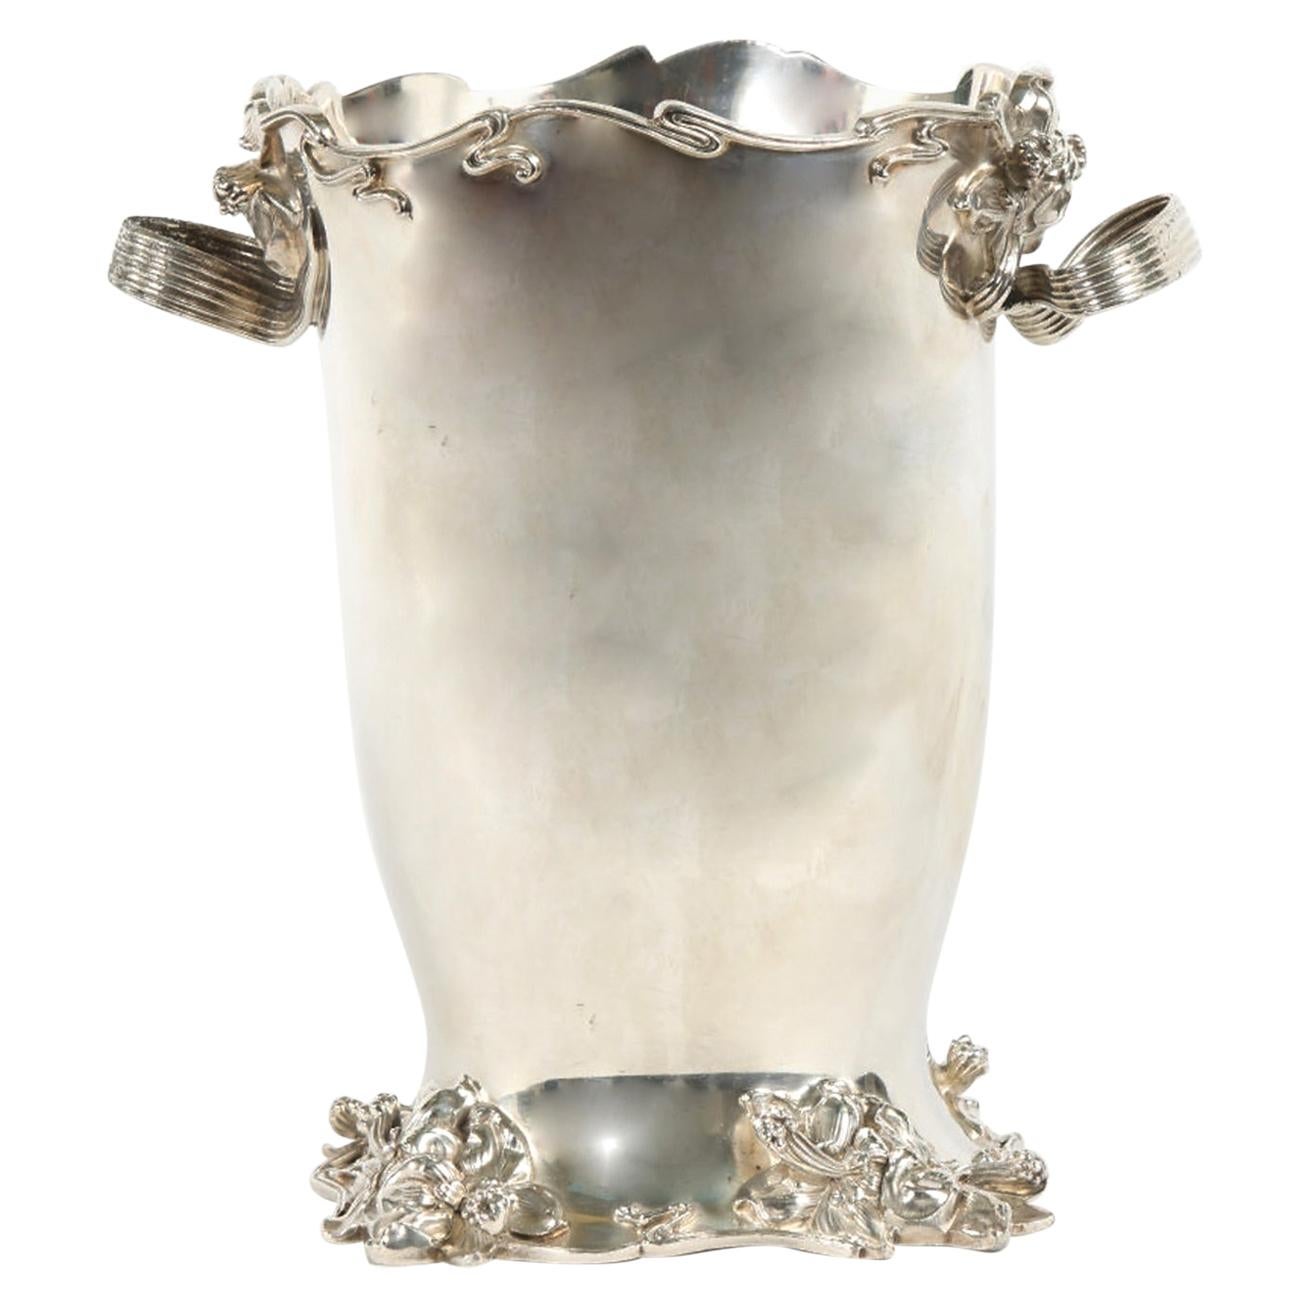 Art Nouveau Silver Plated Cooler / Ice Bucket